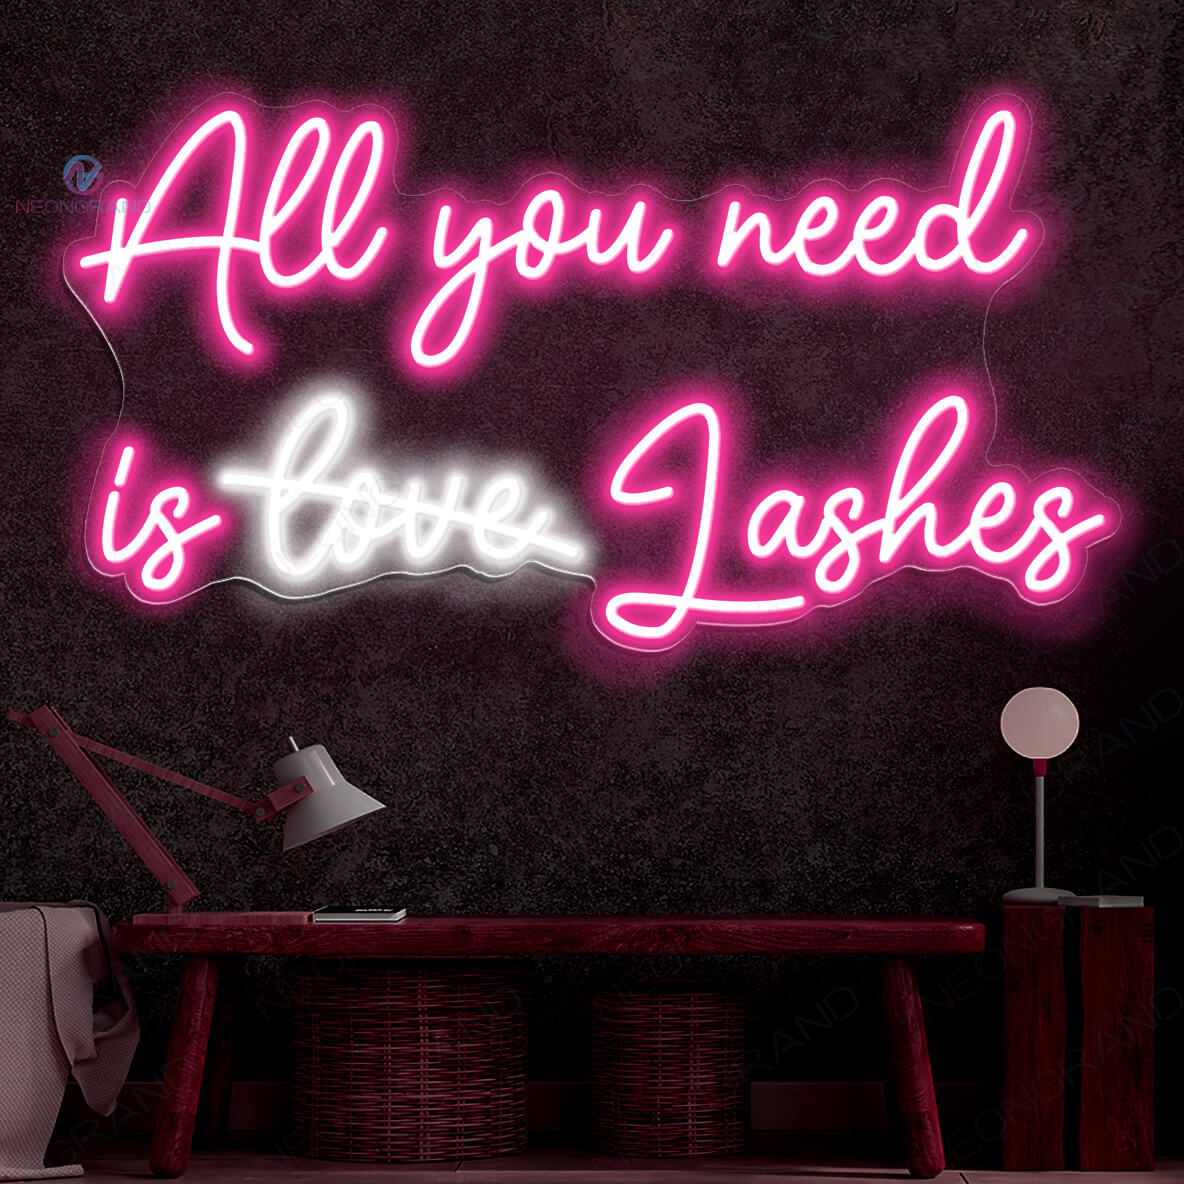 All You Need Is Love Lashes Neon Sign Led Light pink